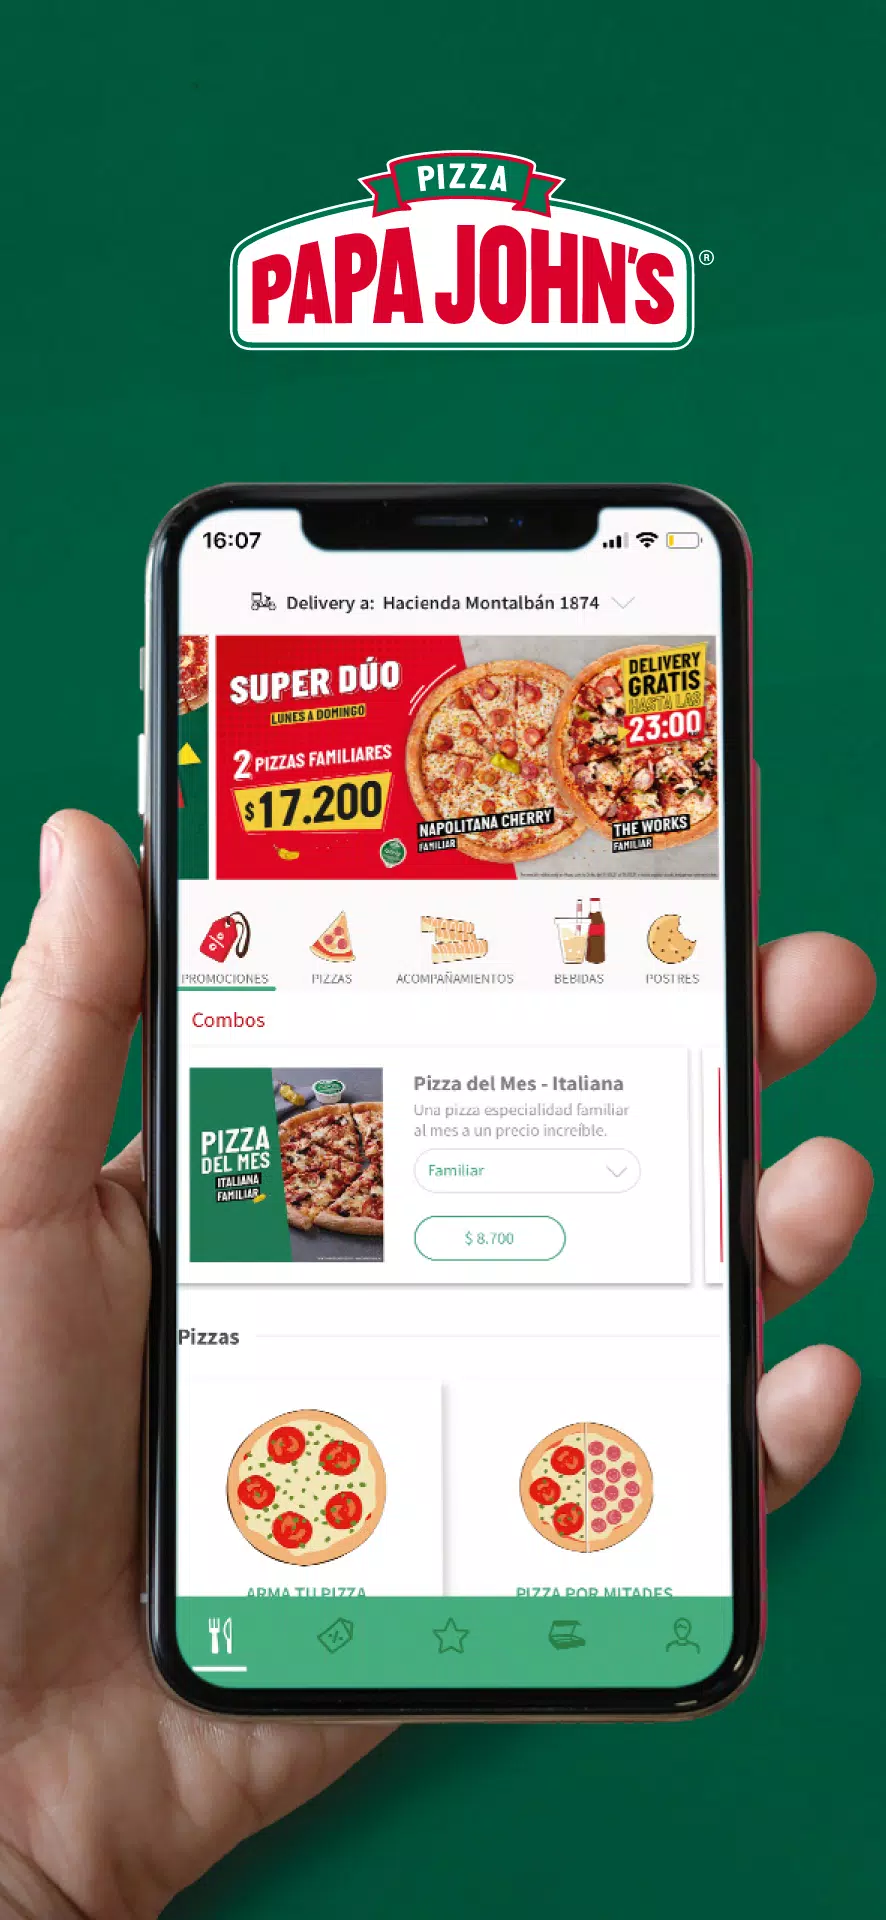 Papa Johns Pizza & Delivery 4.72.0 APK Download by Papa John's